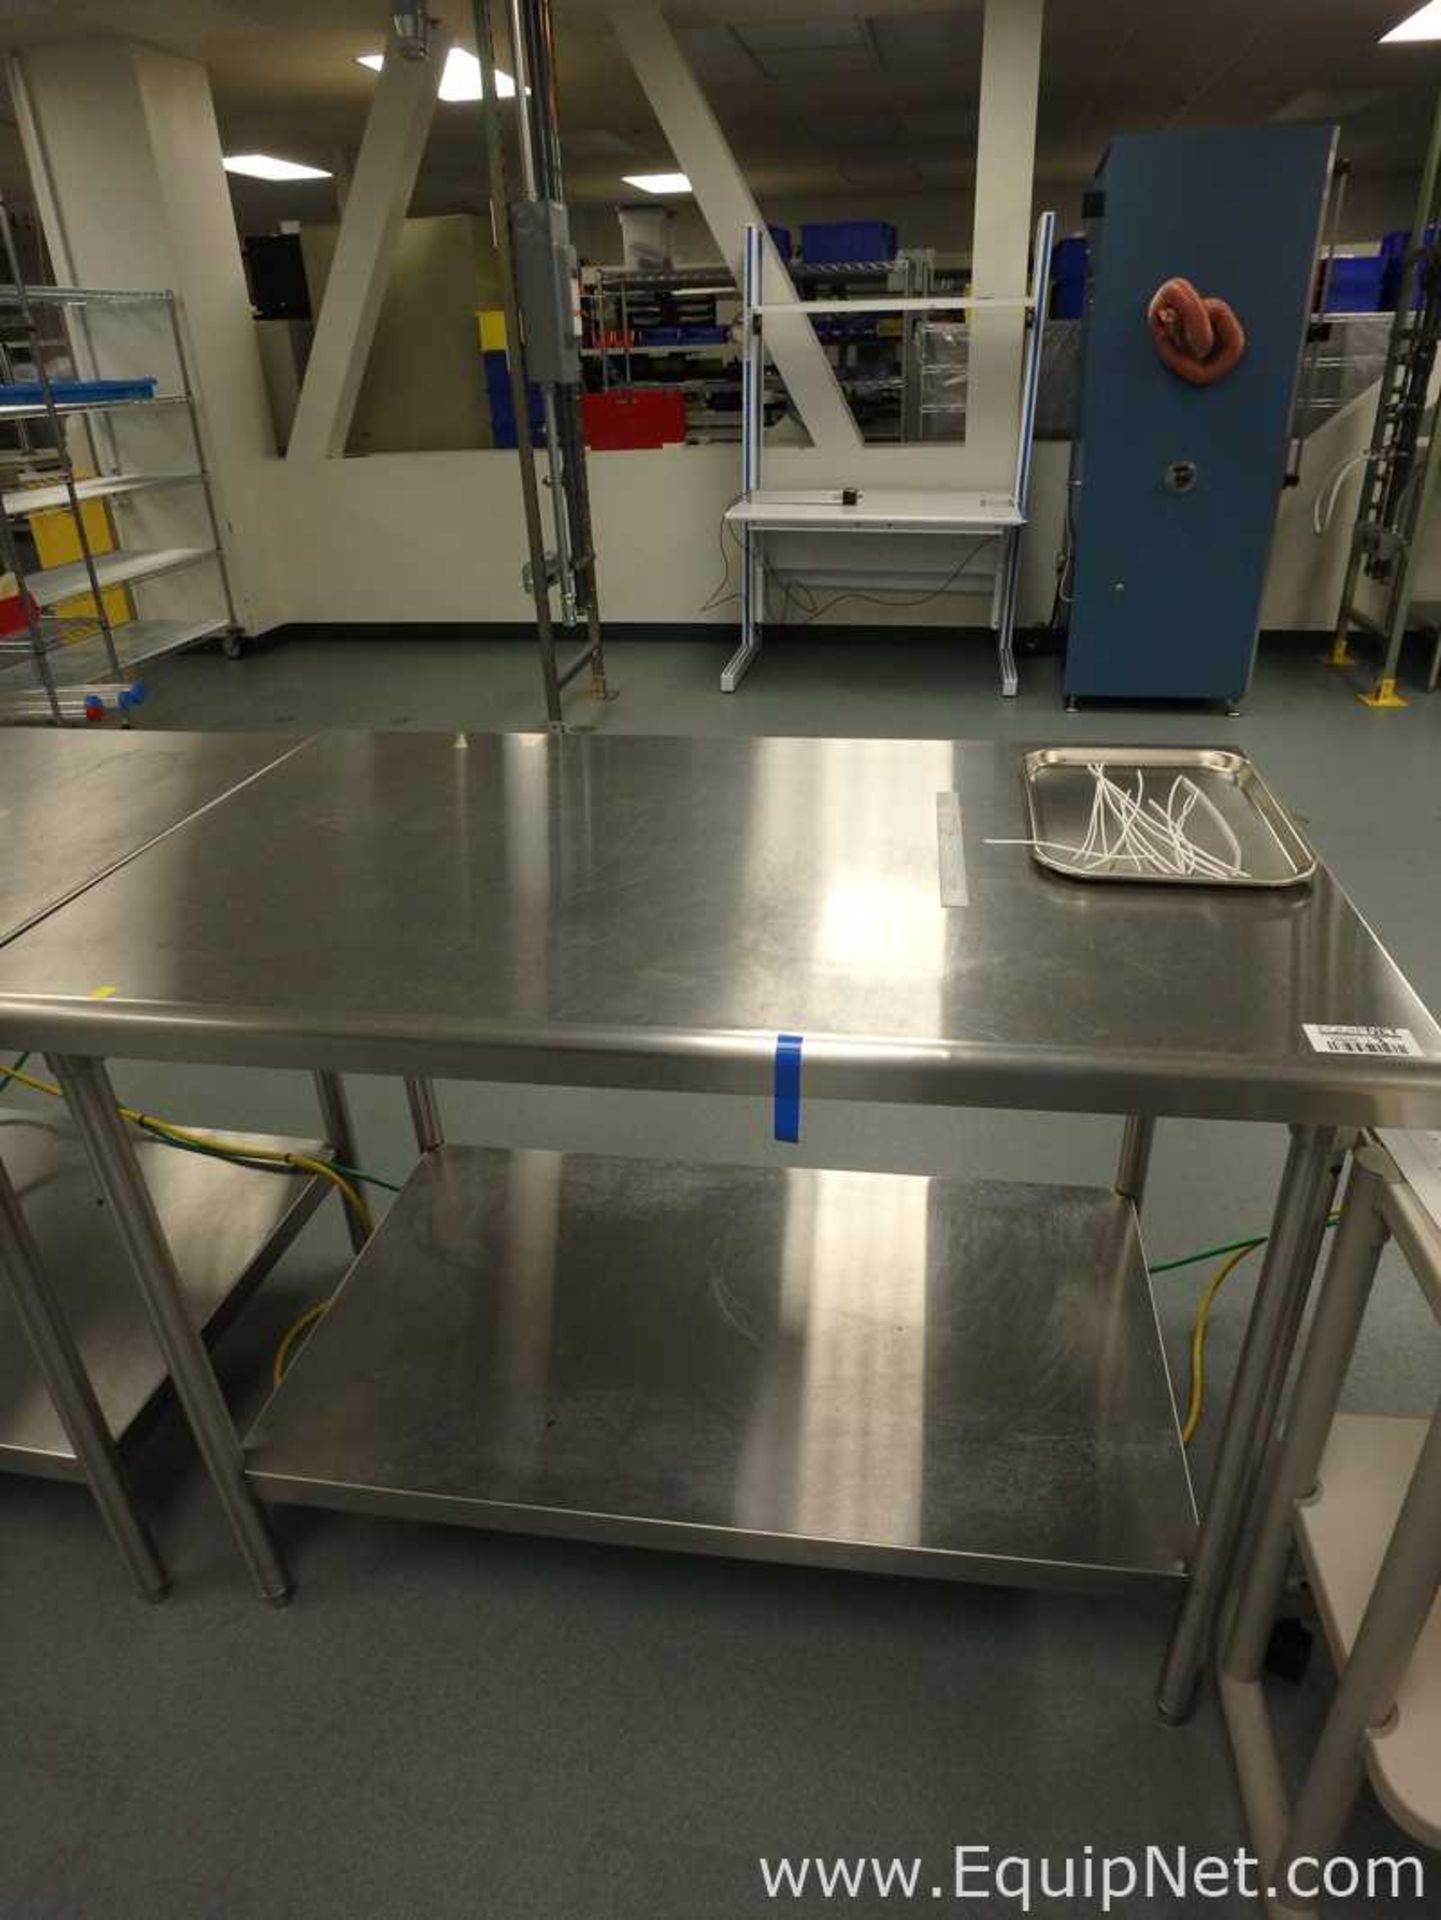 Lot of 4 Stainless Steel Tables - Image 5 of 6